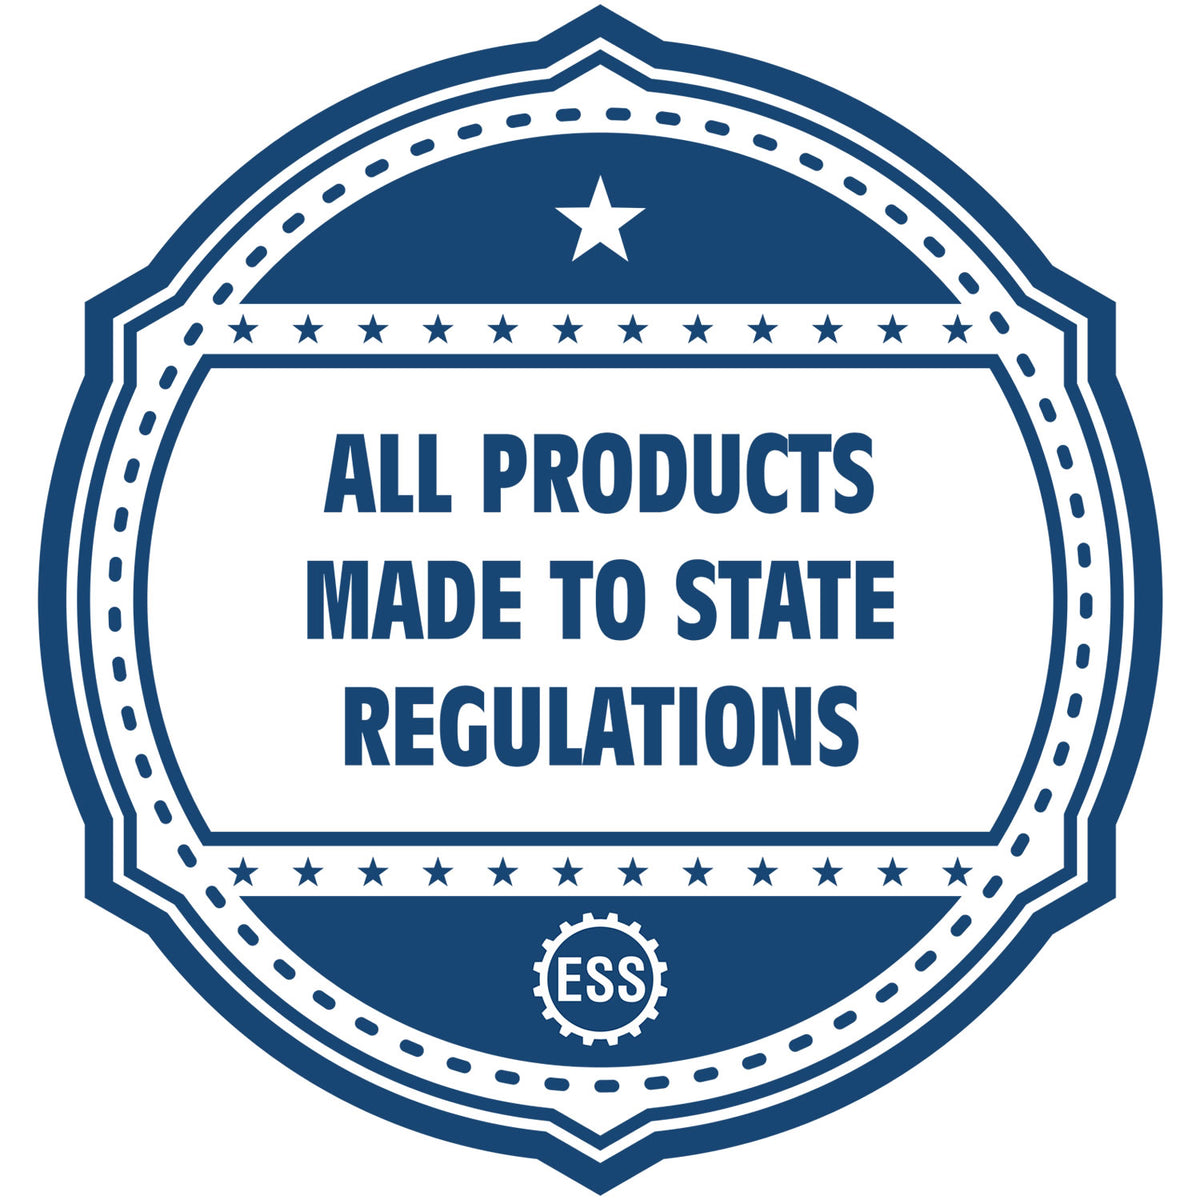 An icon or badge element for the Connecticut Desk Surveyor Seal Embosser showing that this product is made in compliance with state regulations.